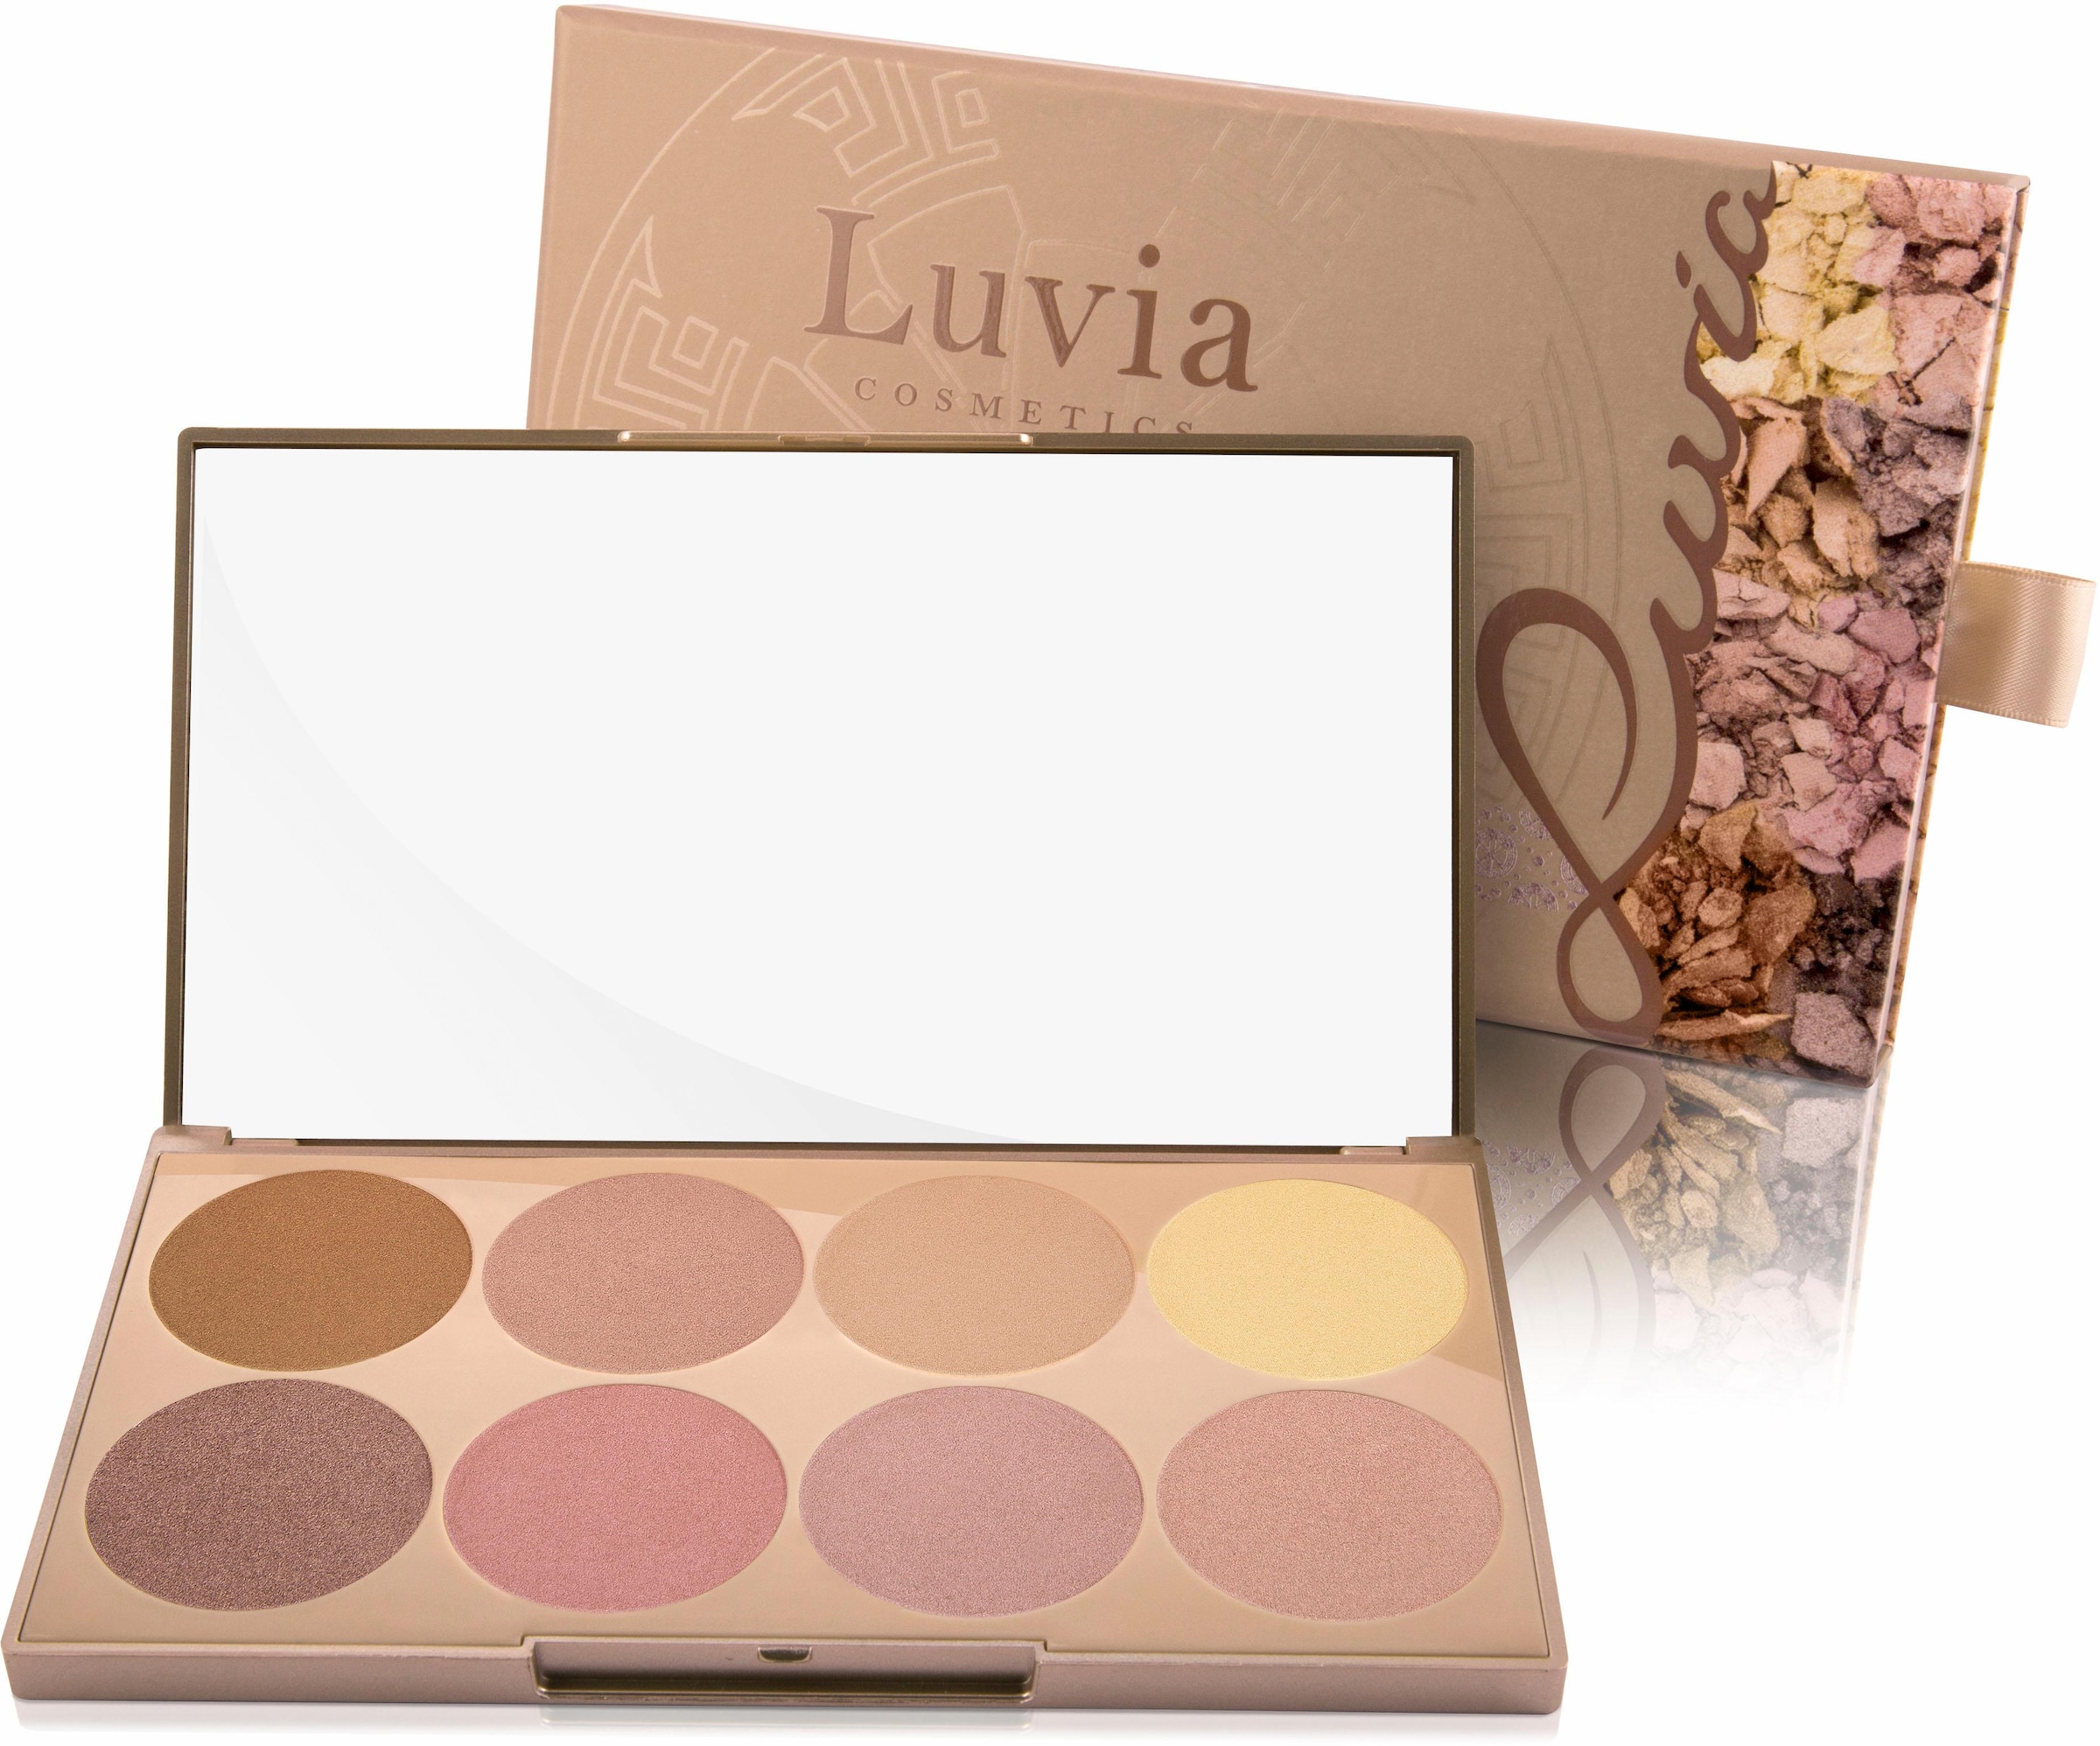 Highlighter-Palette (8 Glow »Prime Luvia 1« Vol. Farben Cosmetics Essential 8 Shades tlg.) Contouring